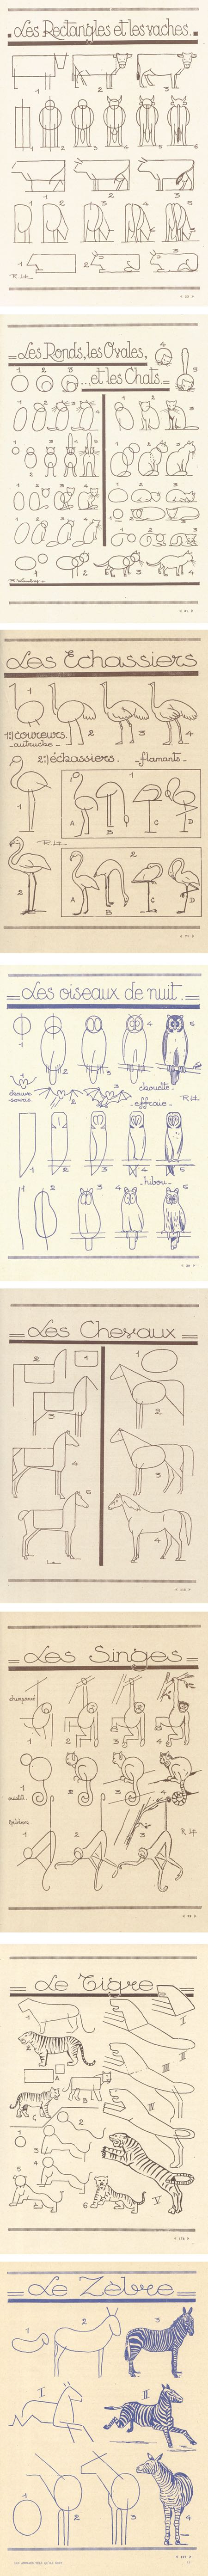 Les animaux tels qu'ils sont, how to draw animals